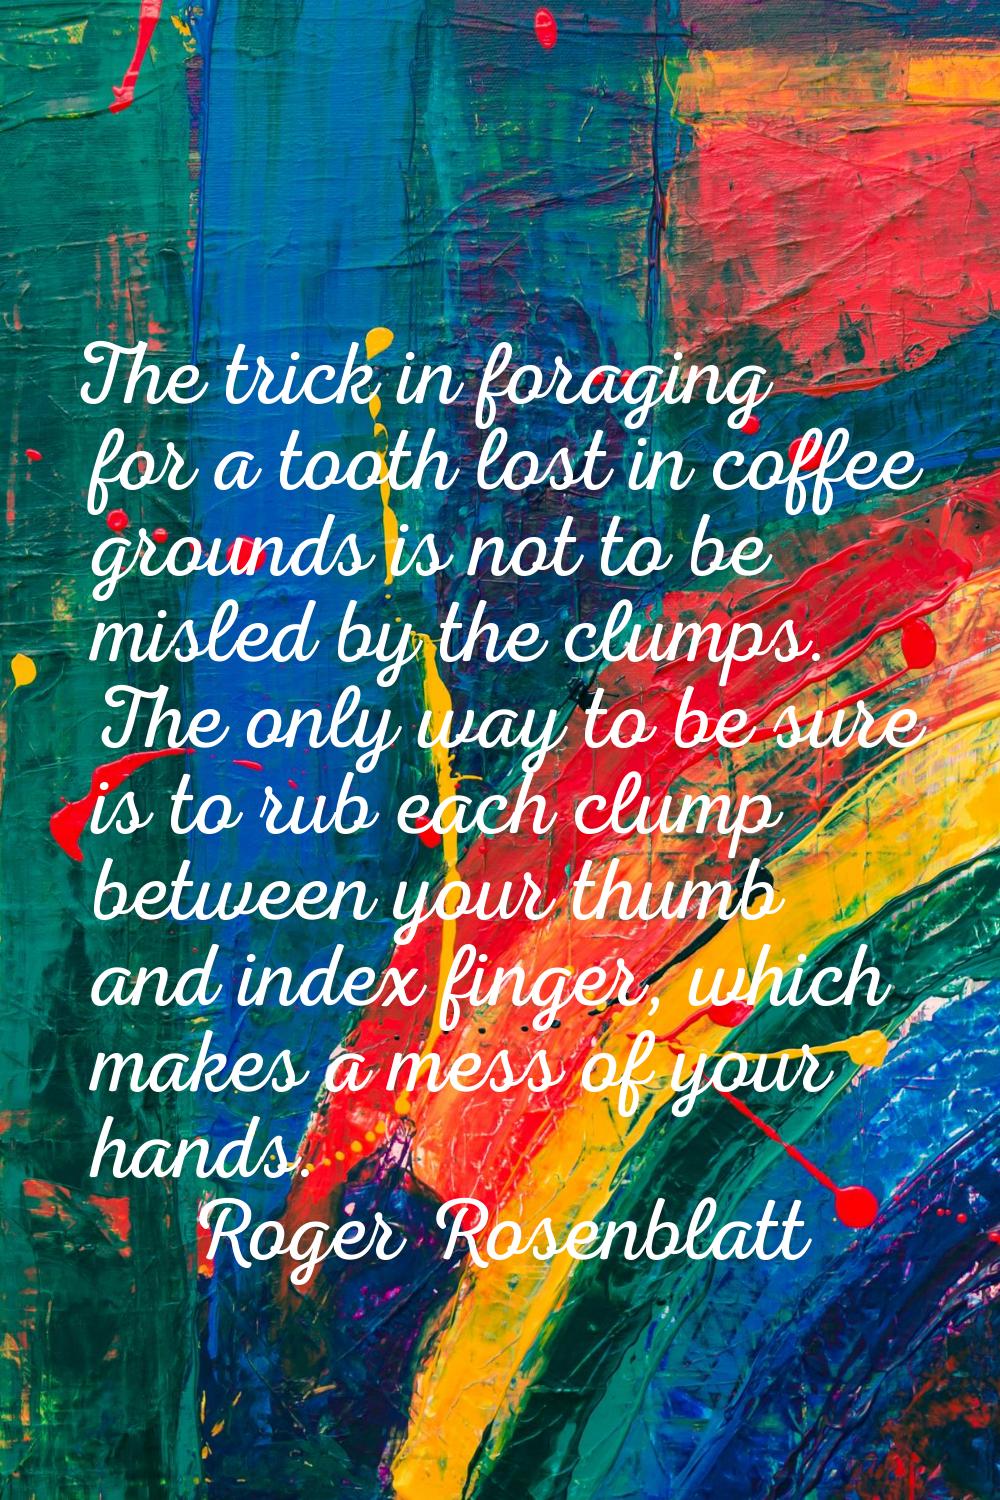 The trick in foraging for a tooth lost in coffee grounds is not to be misled by the clumps. The onl